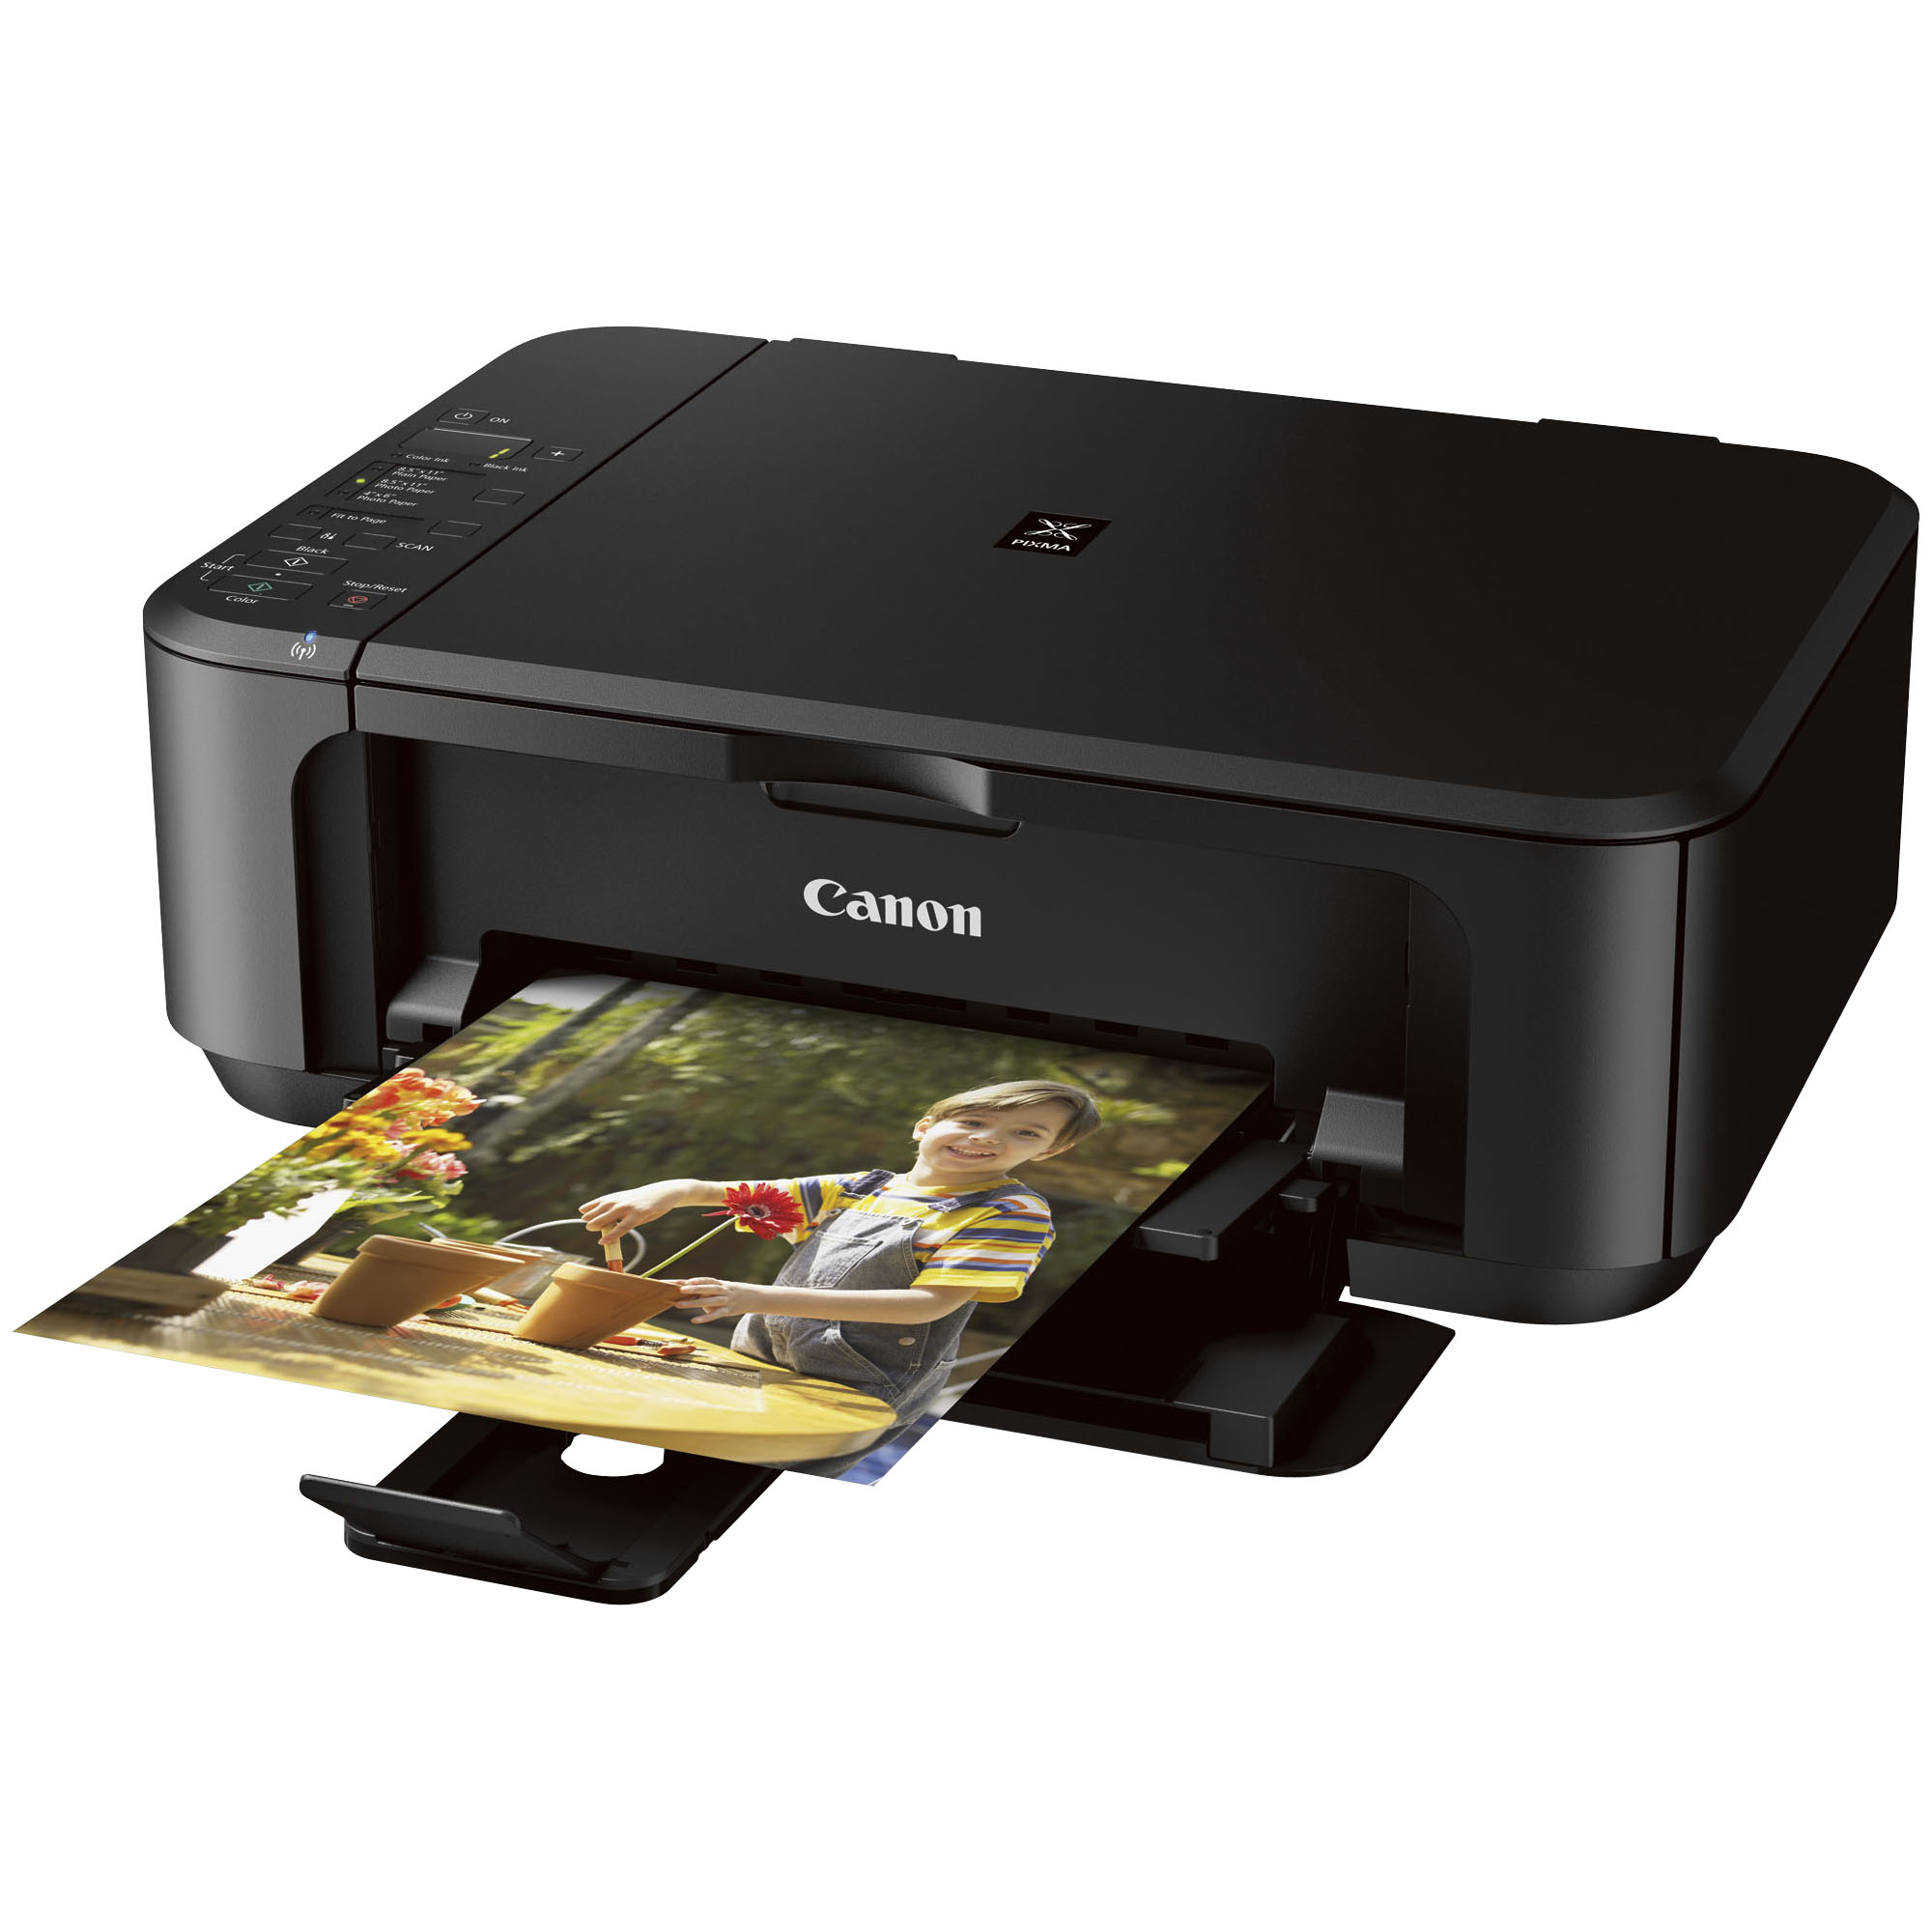 Canon PIXMA MG3222 Wireless Inkjet Photo All-In-One Printer/Copier/Scanner - image 3 of 3